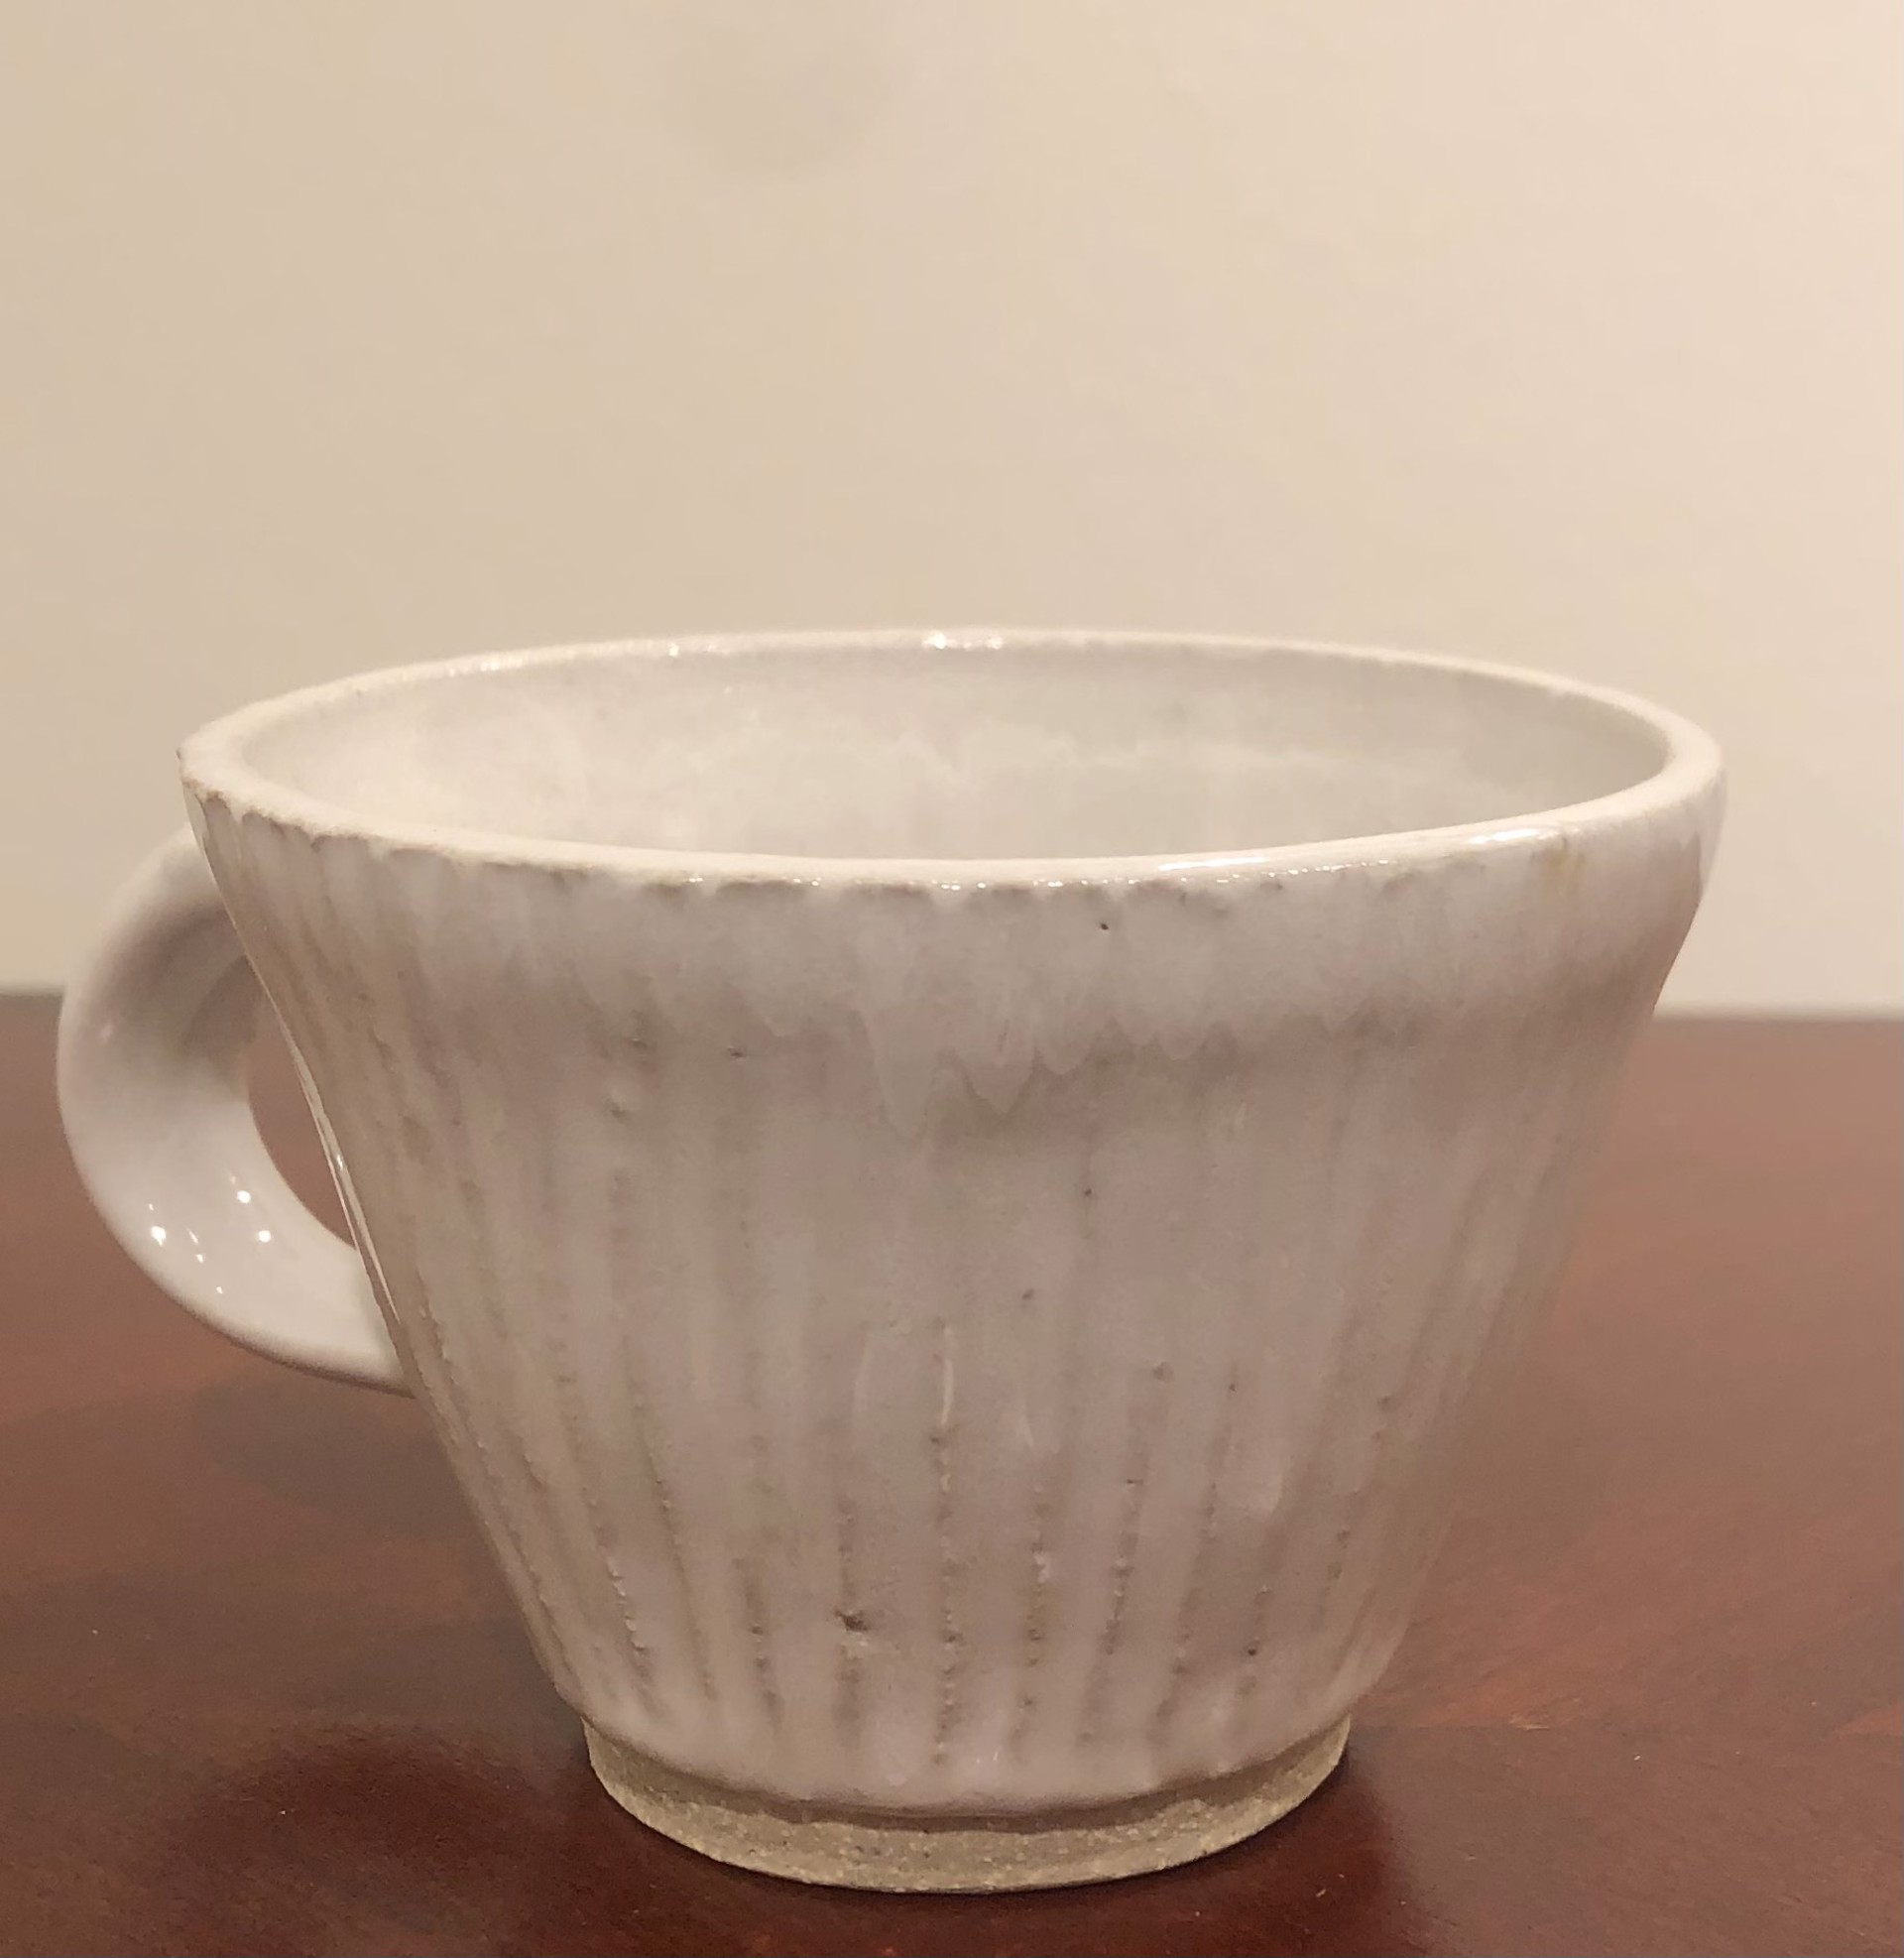 Teacup, vertically carved by Monica Plank